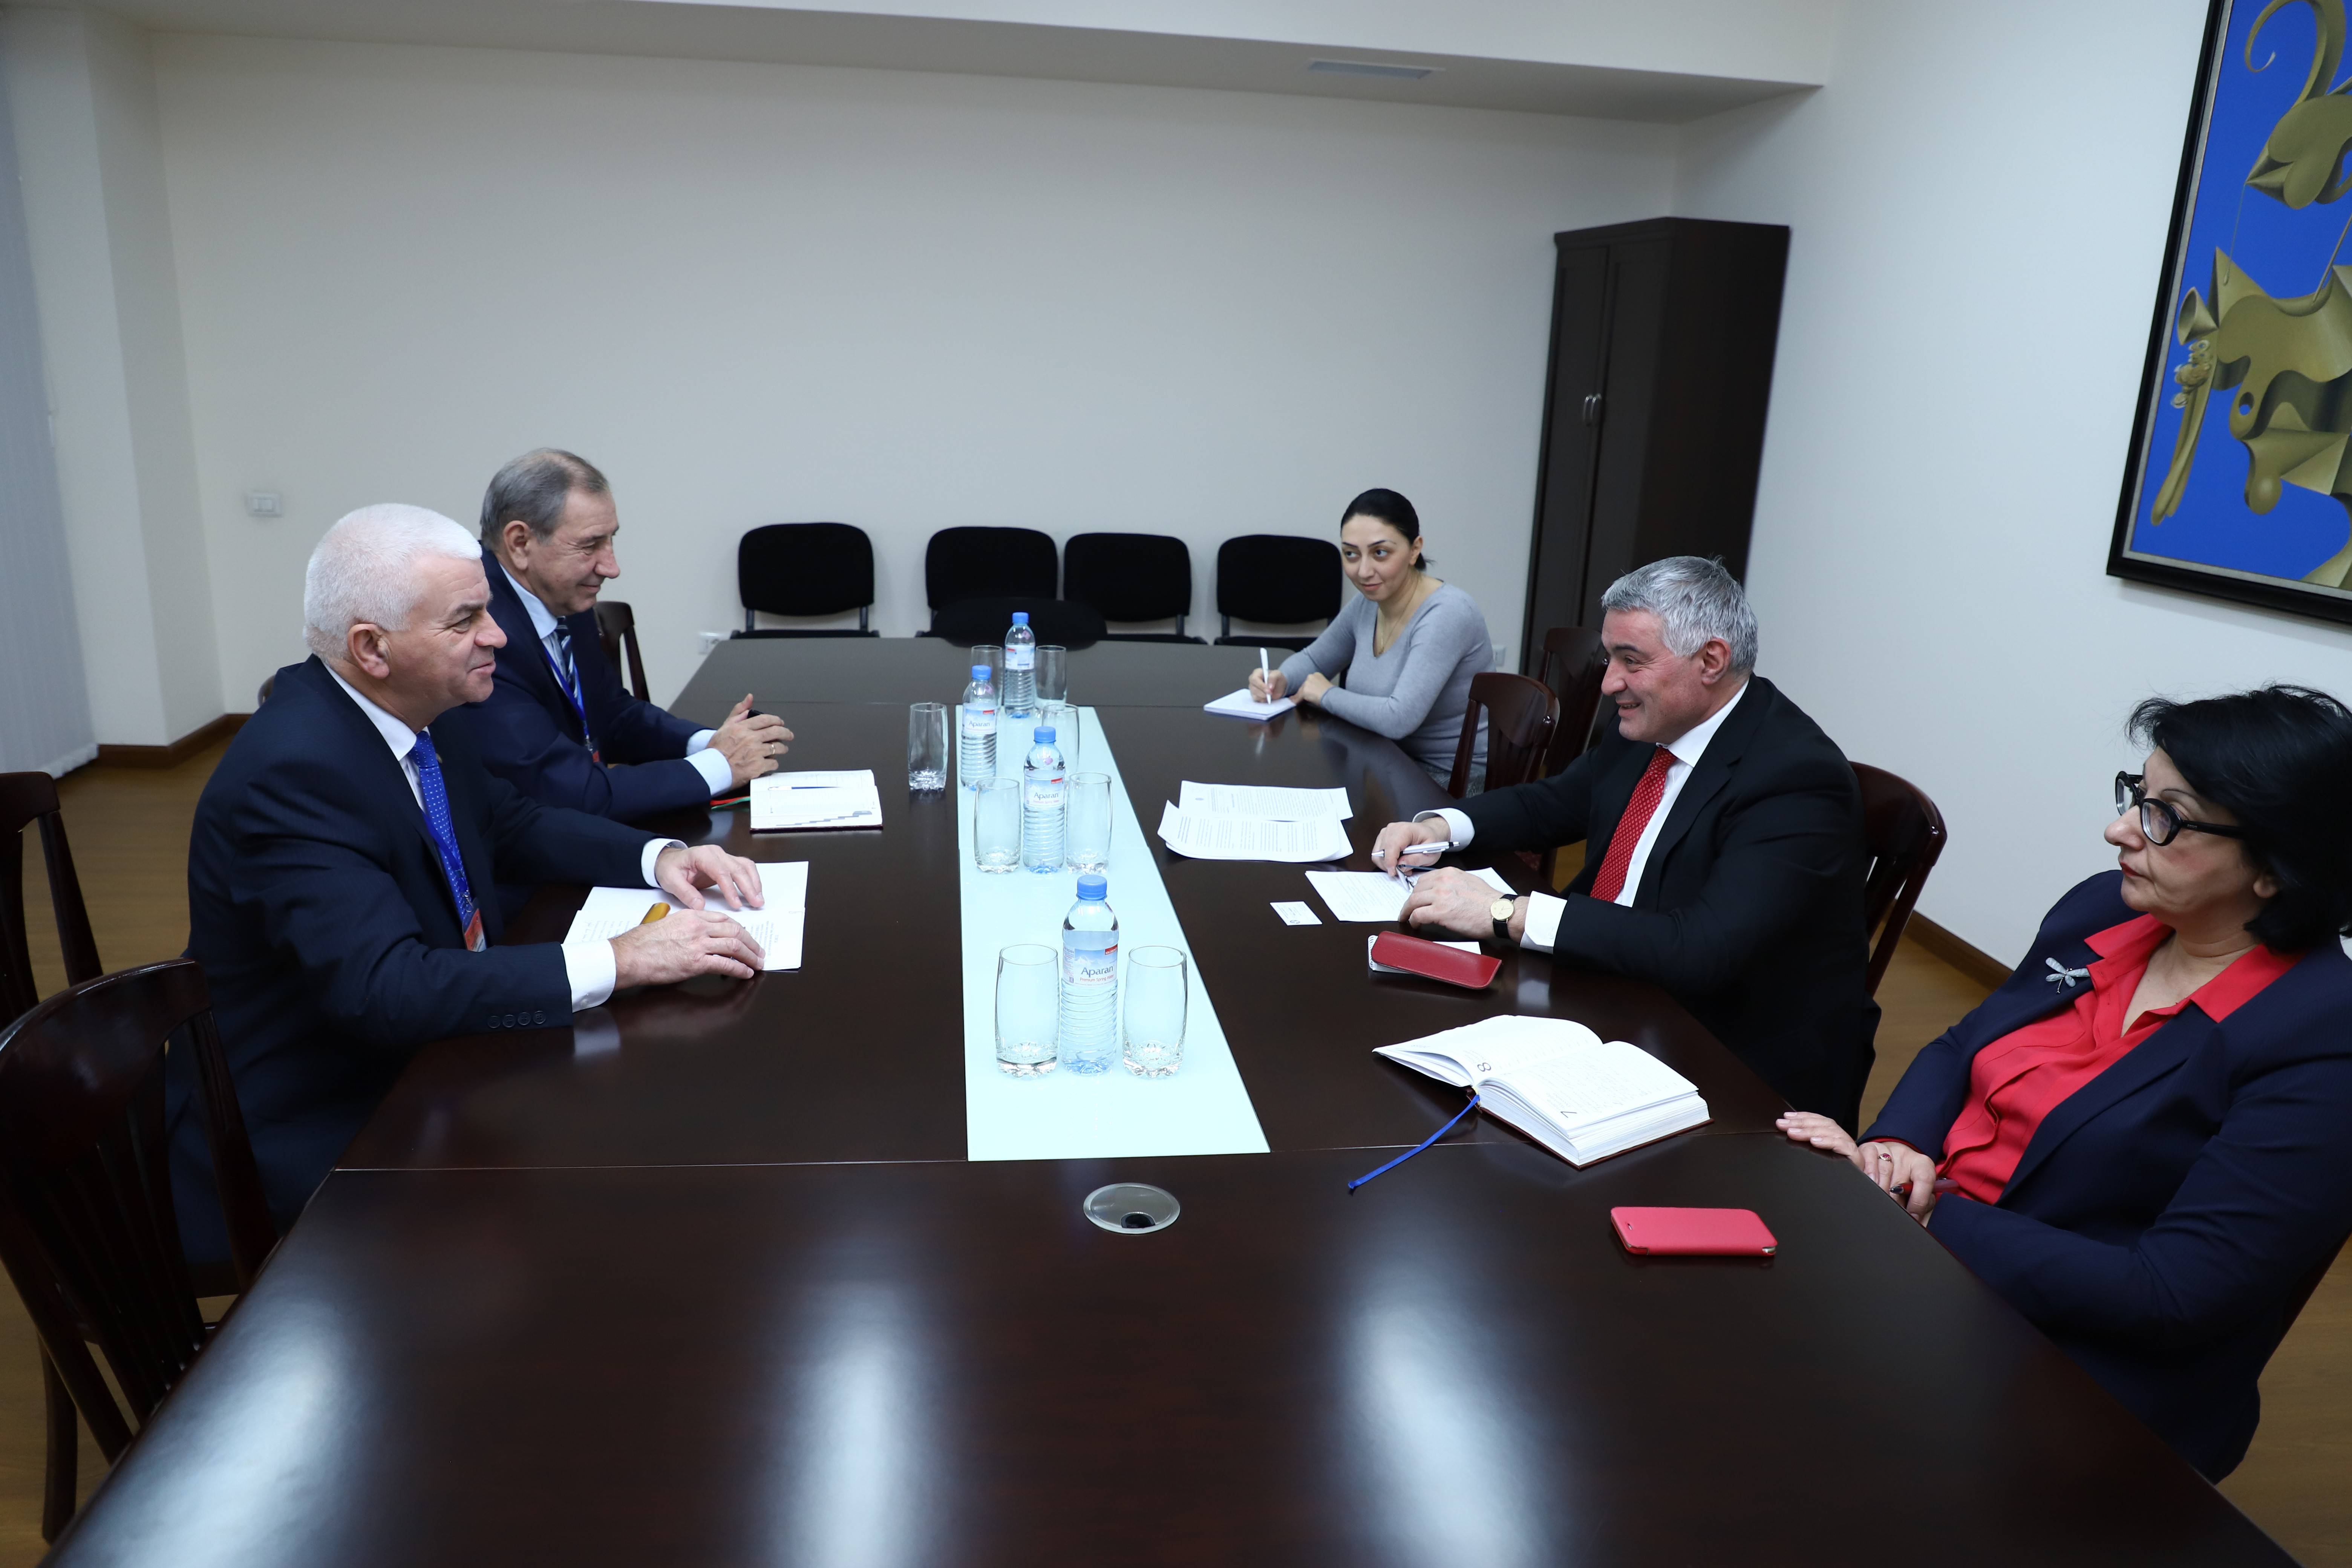 Meeting of Deputy Foreign Minister Hovakimian with the head of the CIS observation mission